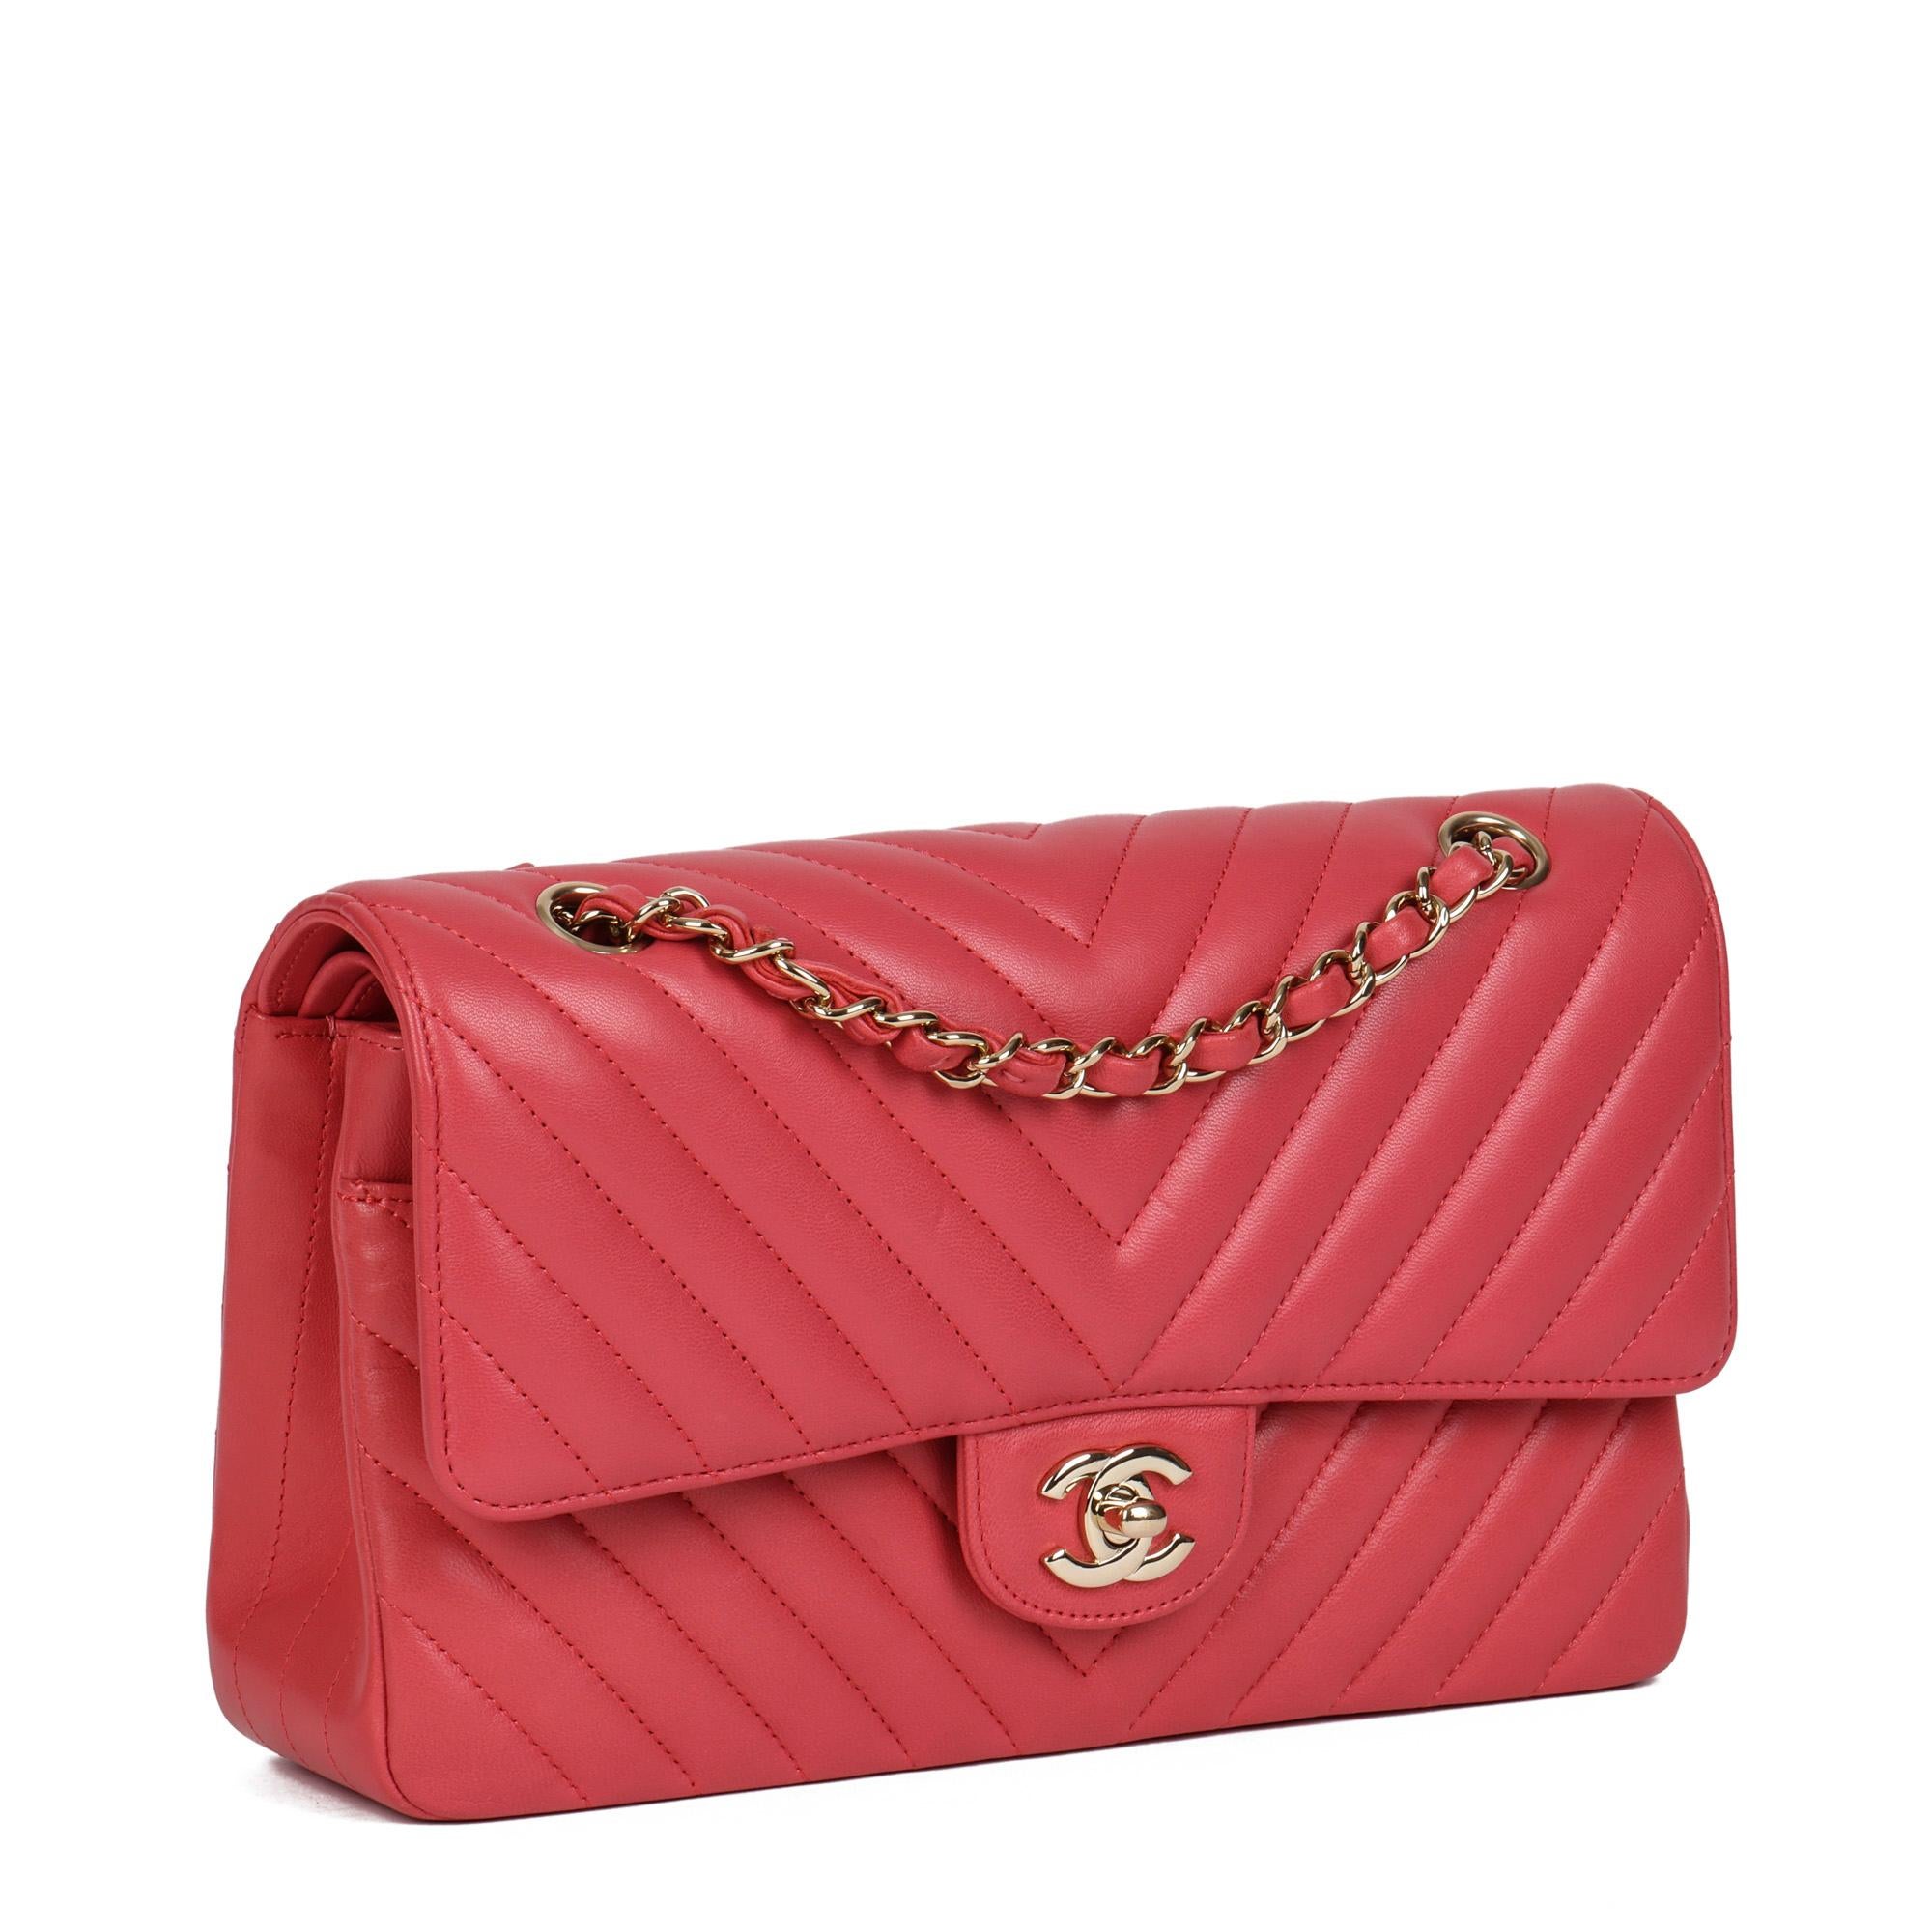 CHANEL
Pink Chevron Quilted Lambskin Medium Classic Double Flap Bag 

Xupes Reference: HB4377
Serial Number: 24675869
Age (Circa): 2018
Accompanied By: Chanel Dust Bag, Authenticity Card 
Authenticity Details: Authenticity Card, Serial Sticker (Made